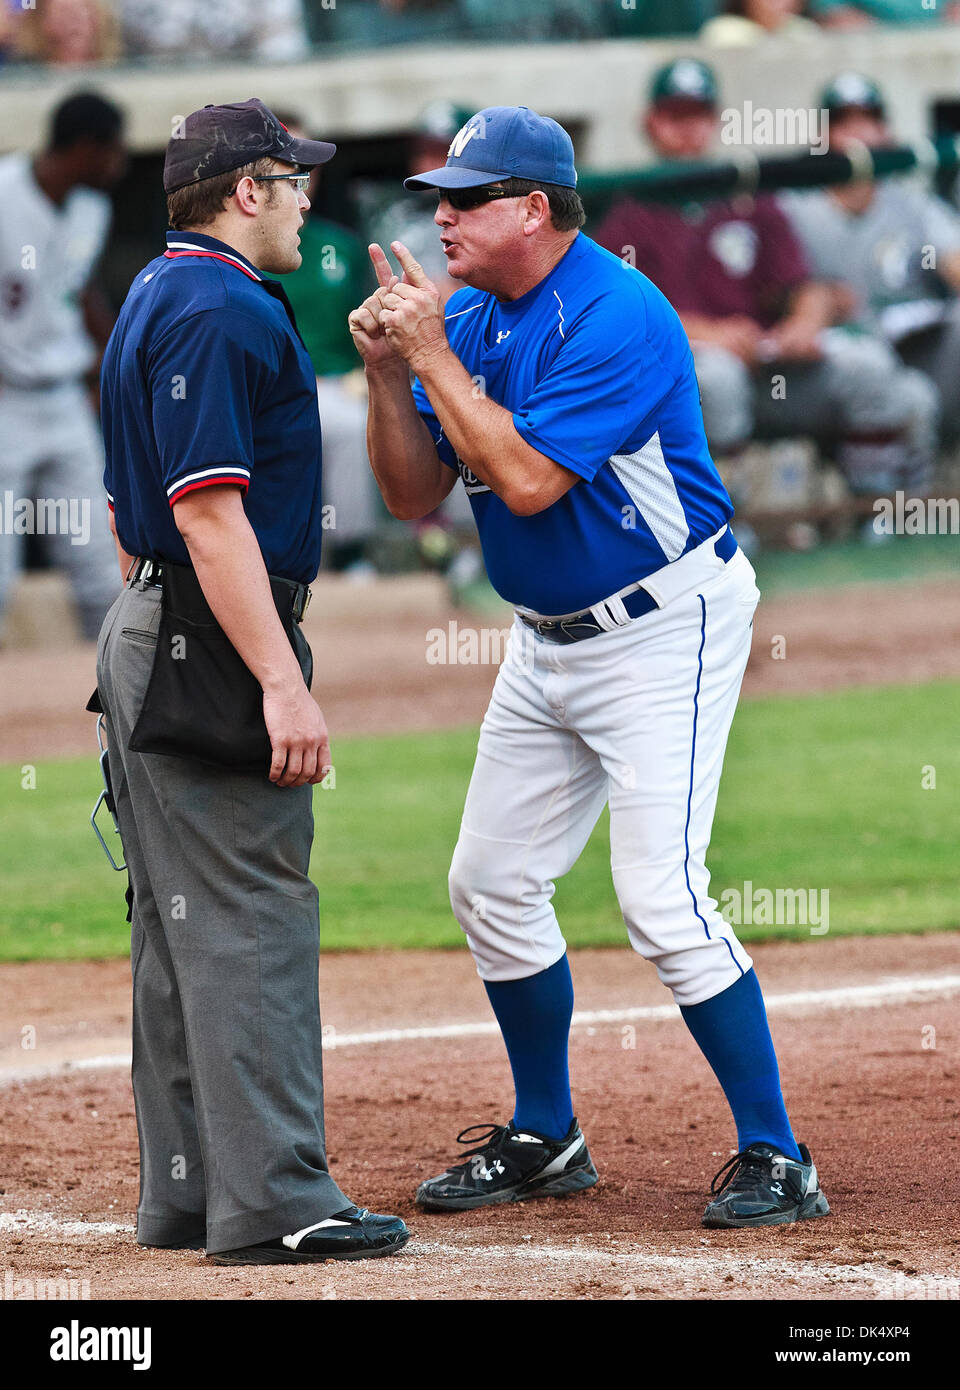 July 19, 2011 - Fort Worth, Texas, U.S - The Fort Worth Cats Manager, Stan Hough, shows his displeasure about a call with the home plate umpire, Shaylor Smith, during the American Association of Independant Professional Baseball game between the Gary Southshore Railcats and the Fort Worth Cats at the historic LaGrave Baseball Field in Fort Worth, Tx. Gary Southshore defeats Fort Wo Stock Photo